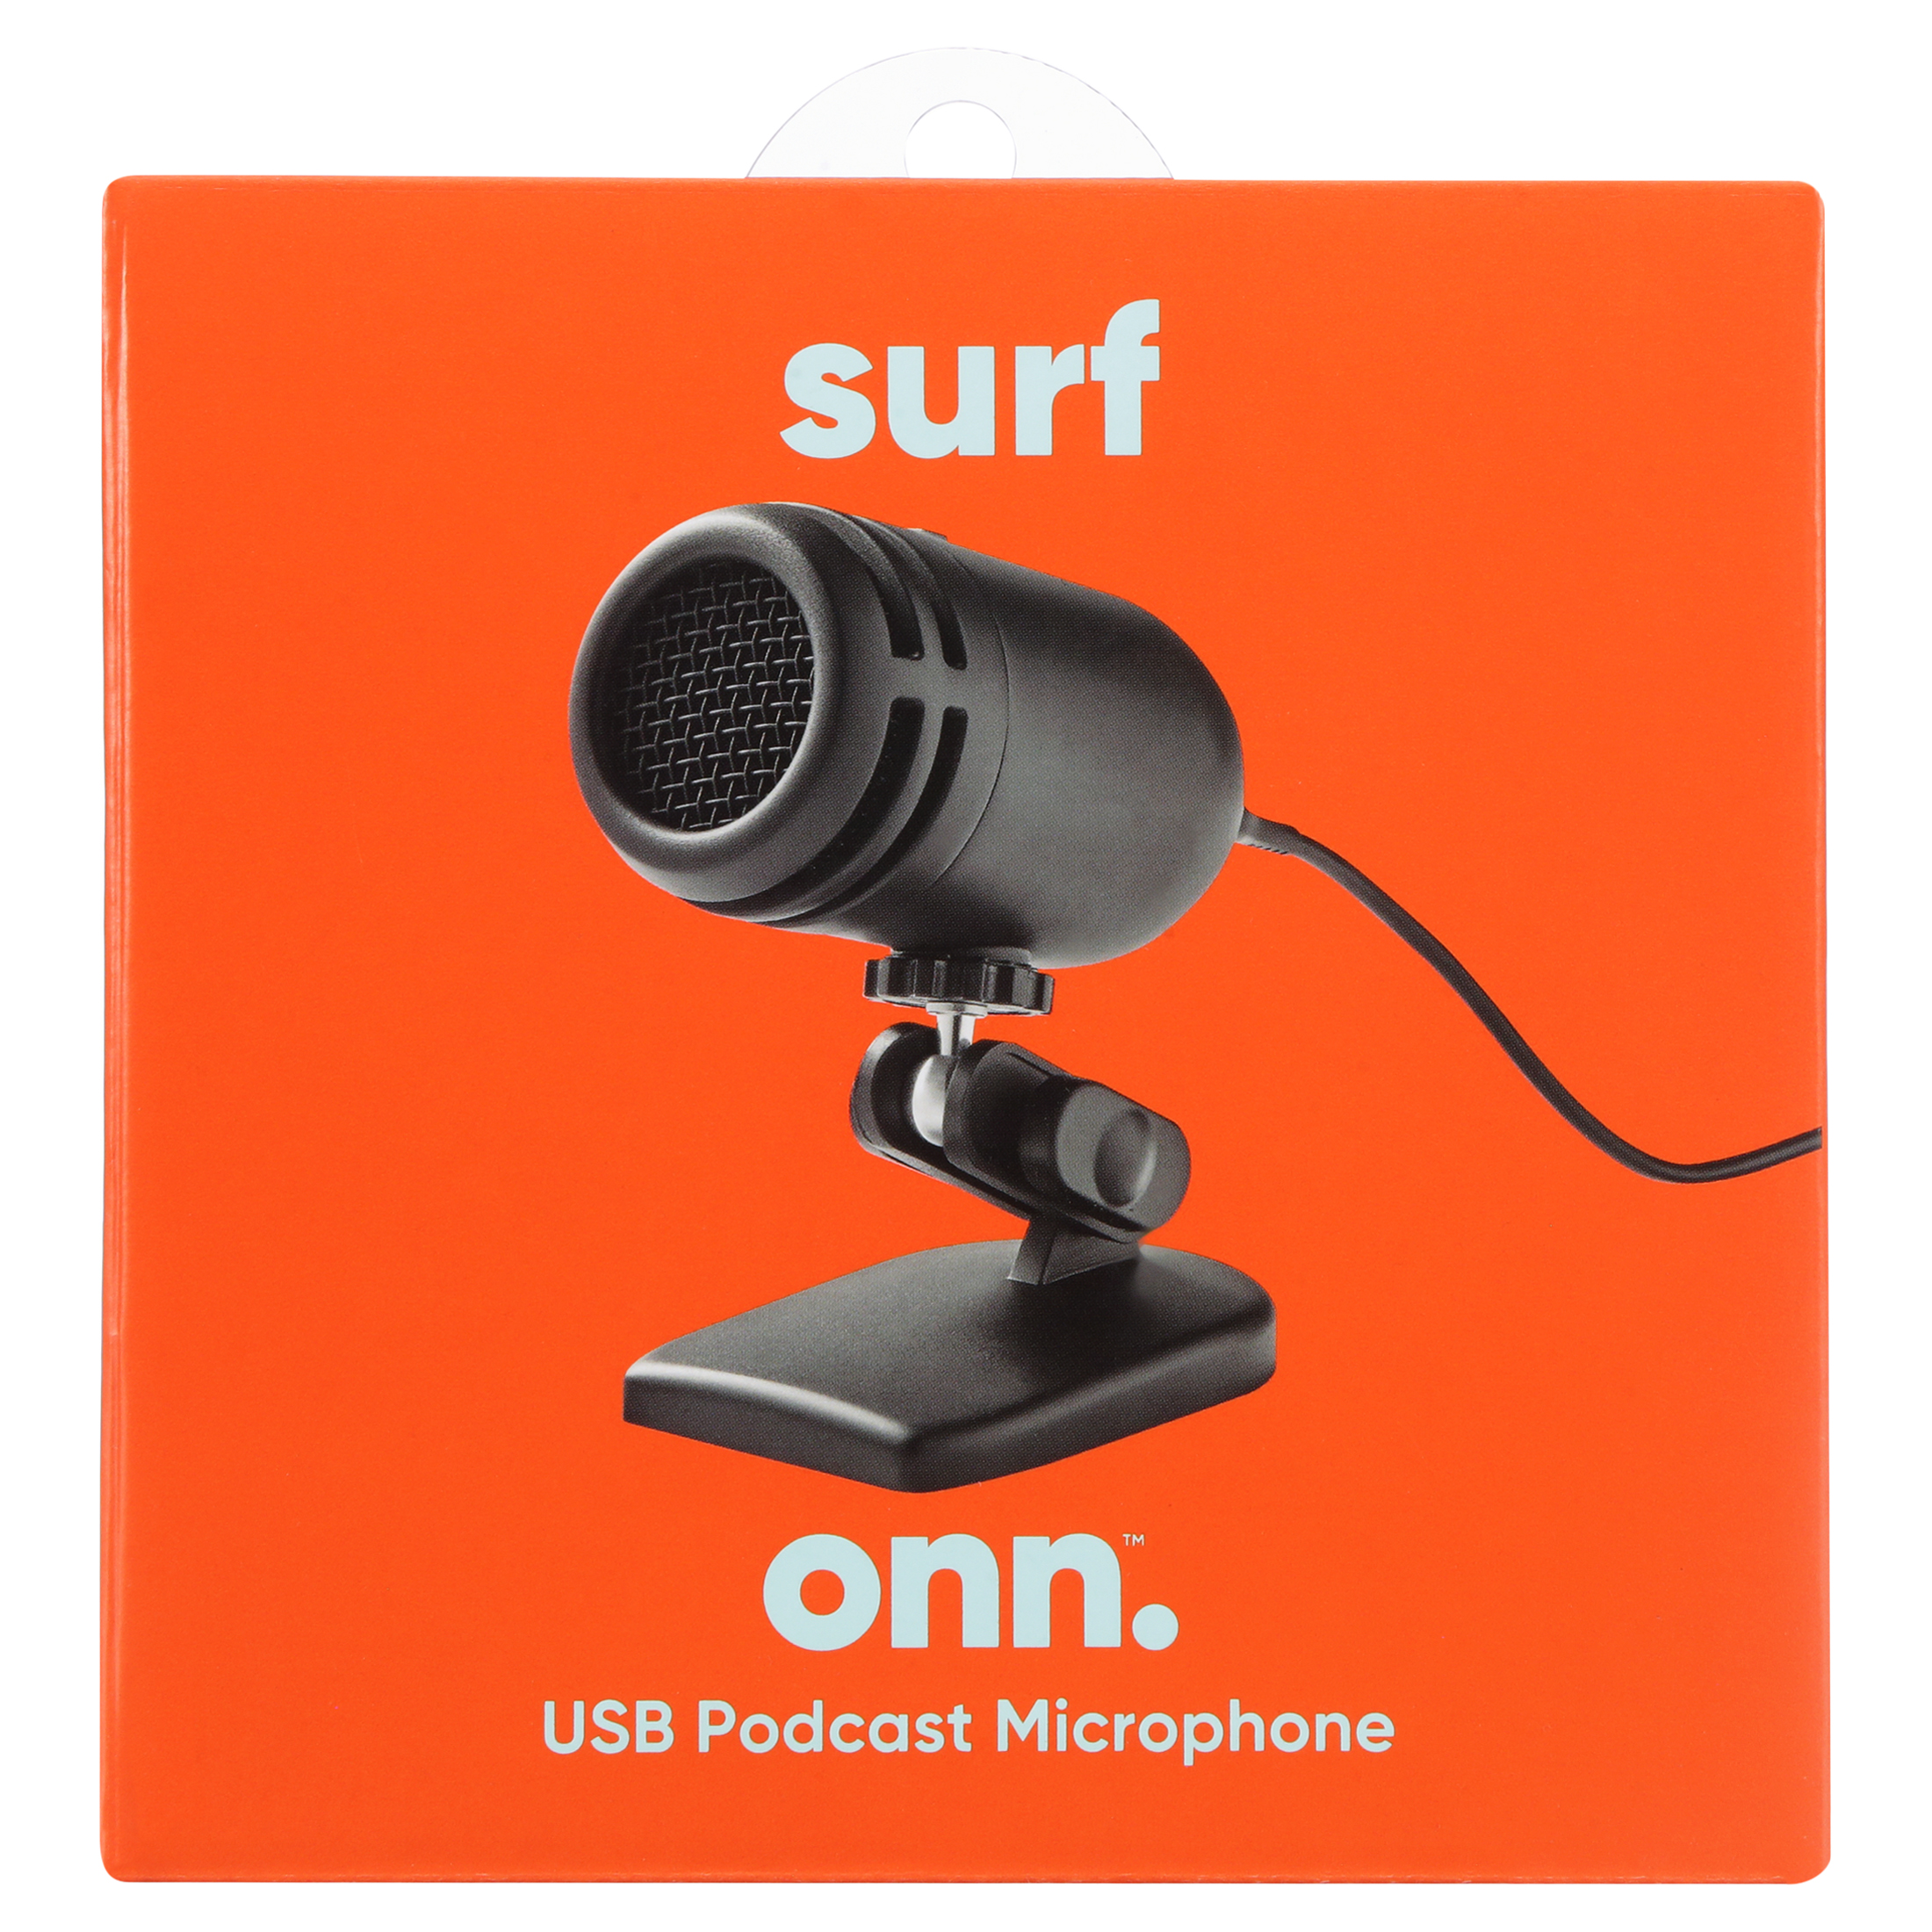 onn. USB Podcast Microphone with Cardioid Recording Pattern - image 4 of 9